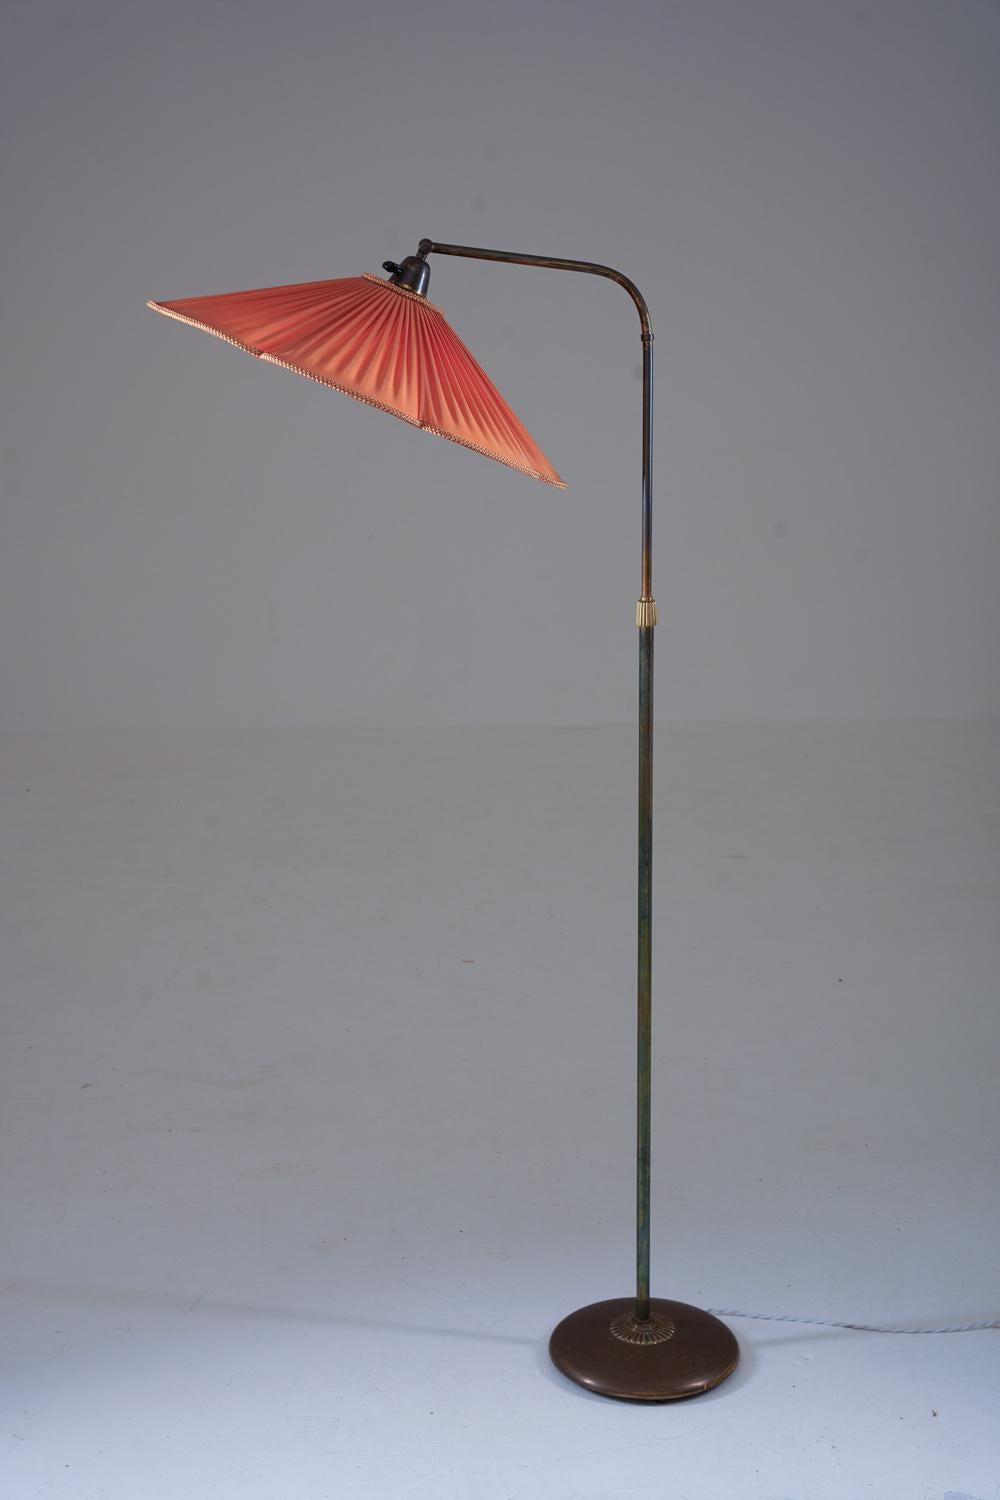 Lovely Swedish modern floor lamp from Nordiska Kompaniet (NK), Sweden, 1940s.
The lamp consists of a base and rod in brass, supporting a swivel arm that holds the shade.
The height is adjustable between 130-170cm (51-67